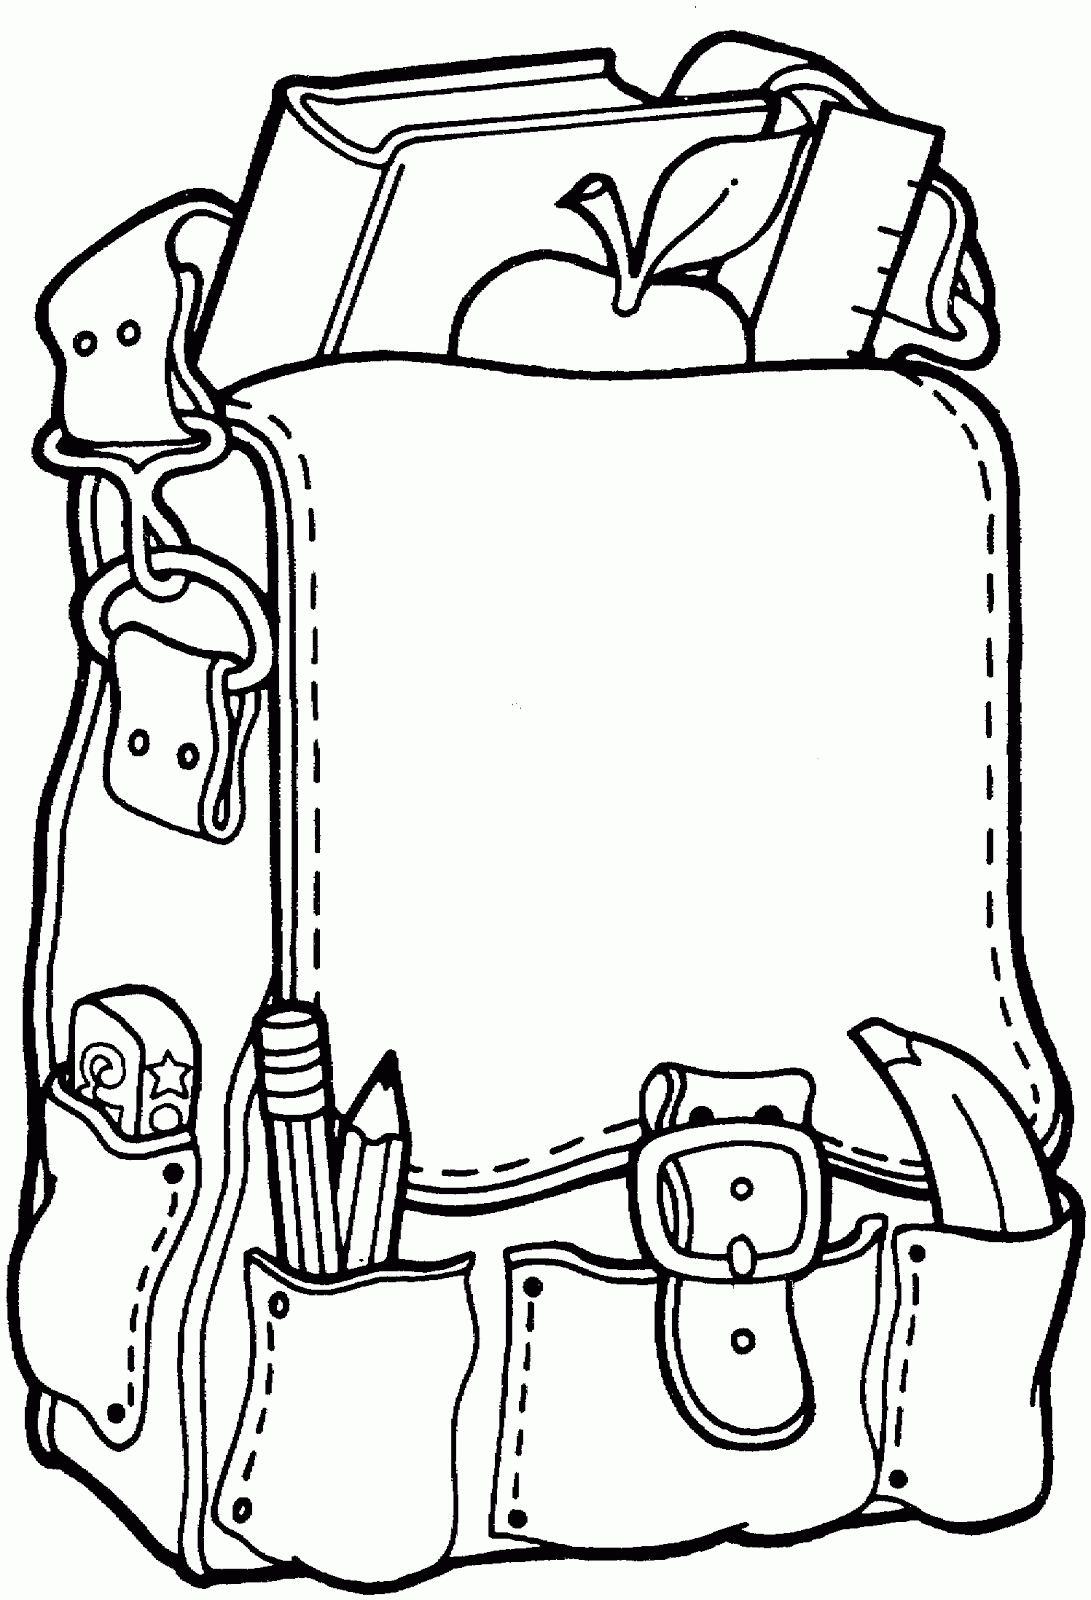 back-to-school-coloring-pages-2011